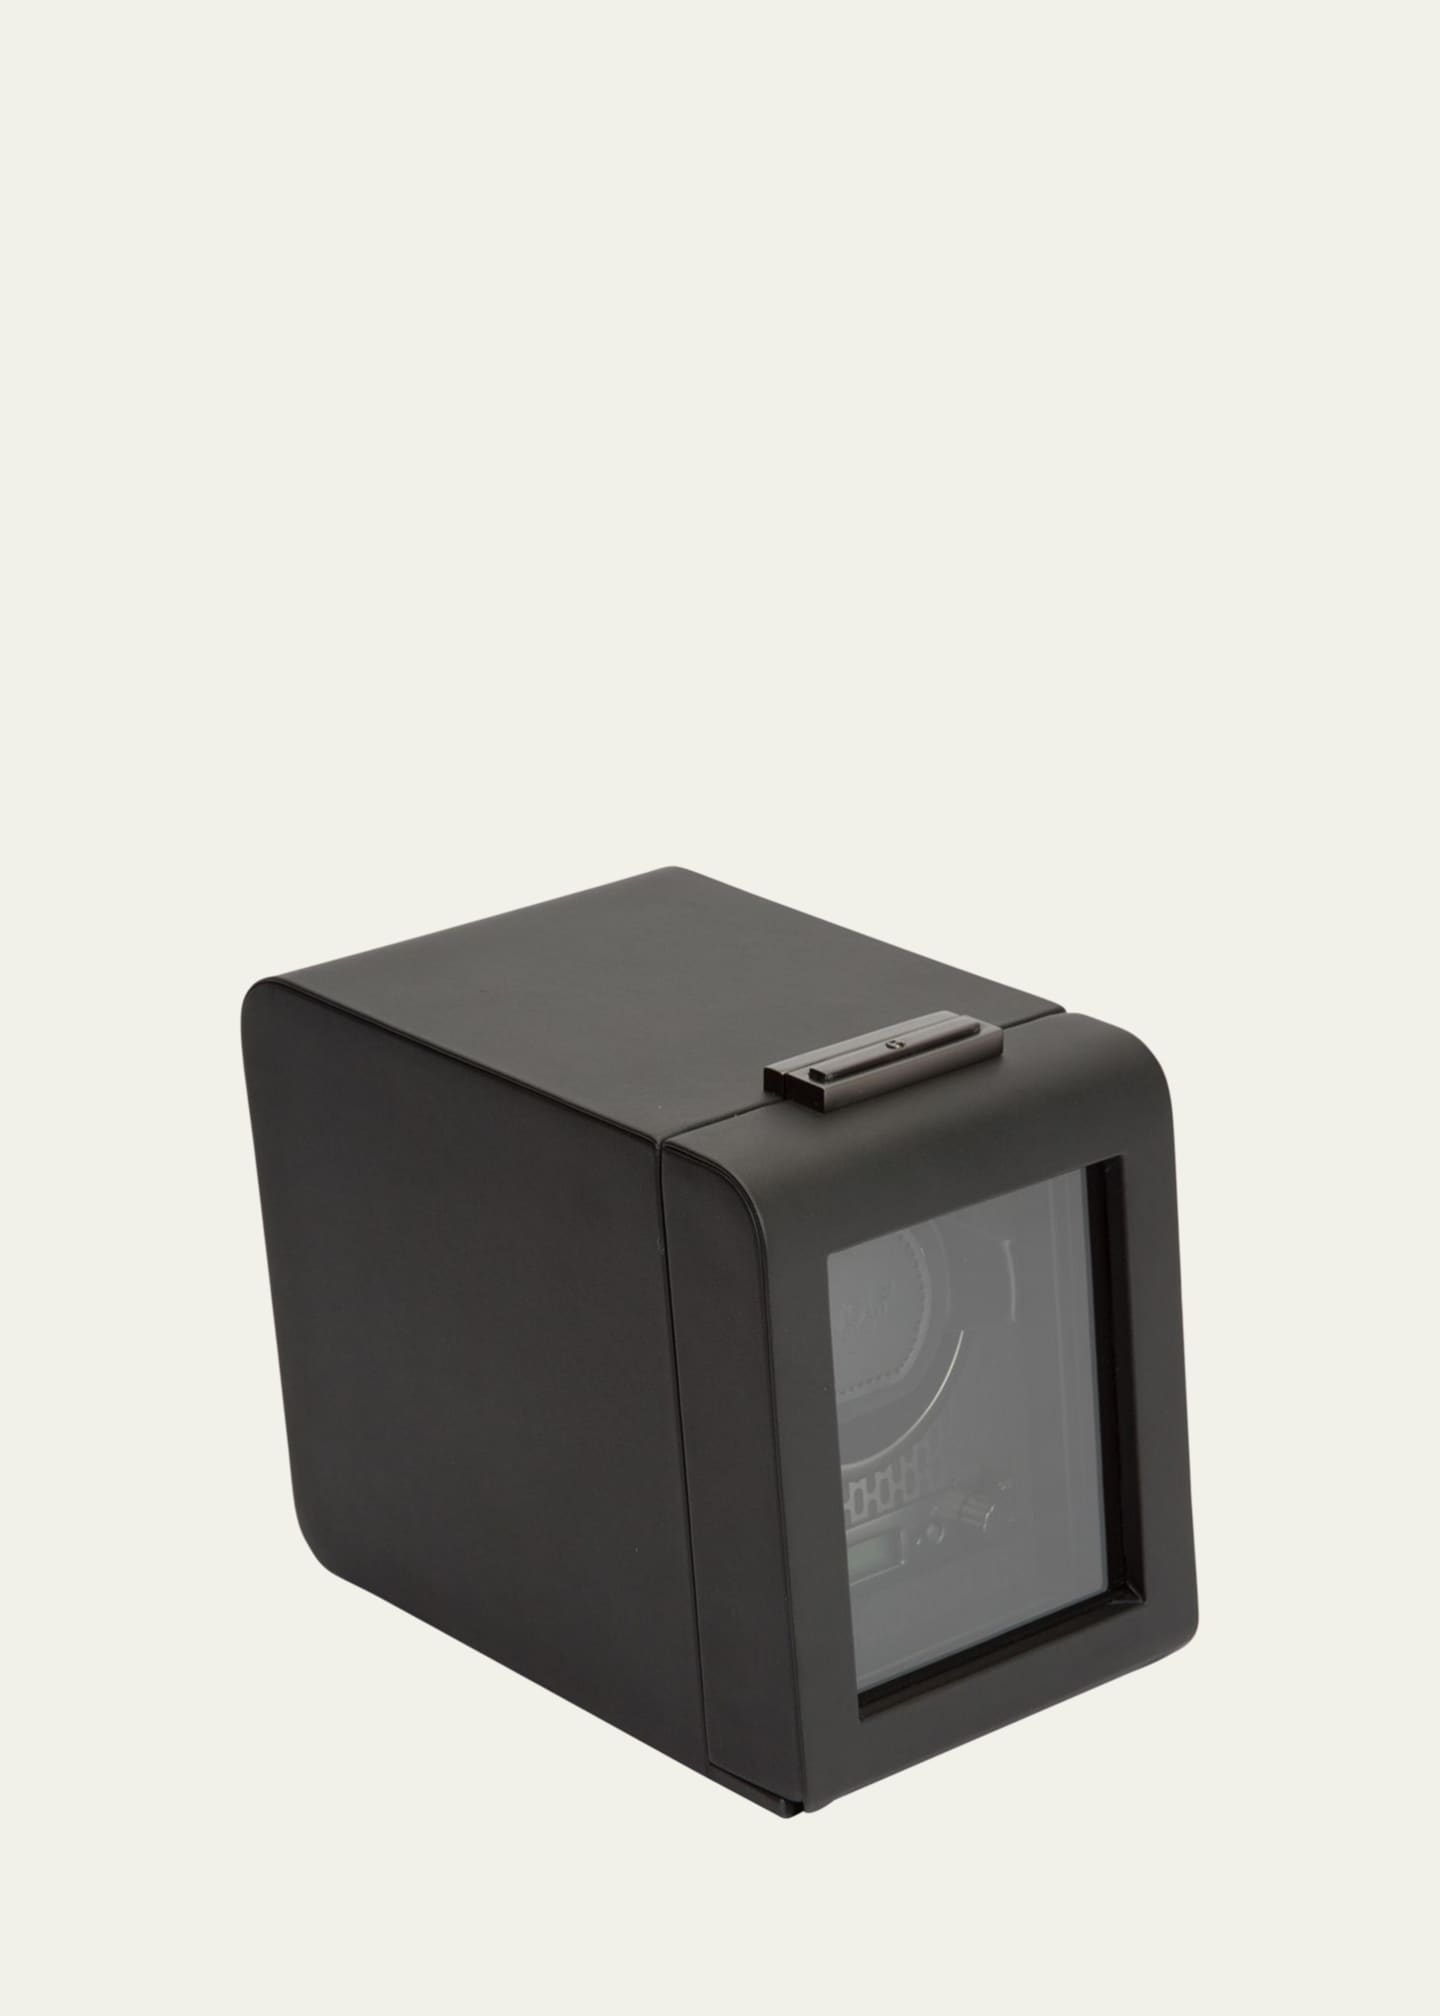 WOLF Axis Single Watch Winder Image 1 of 4